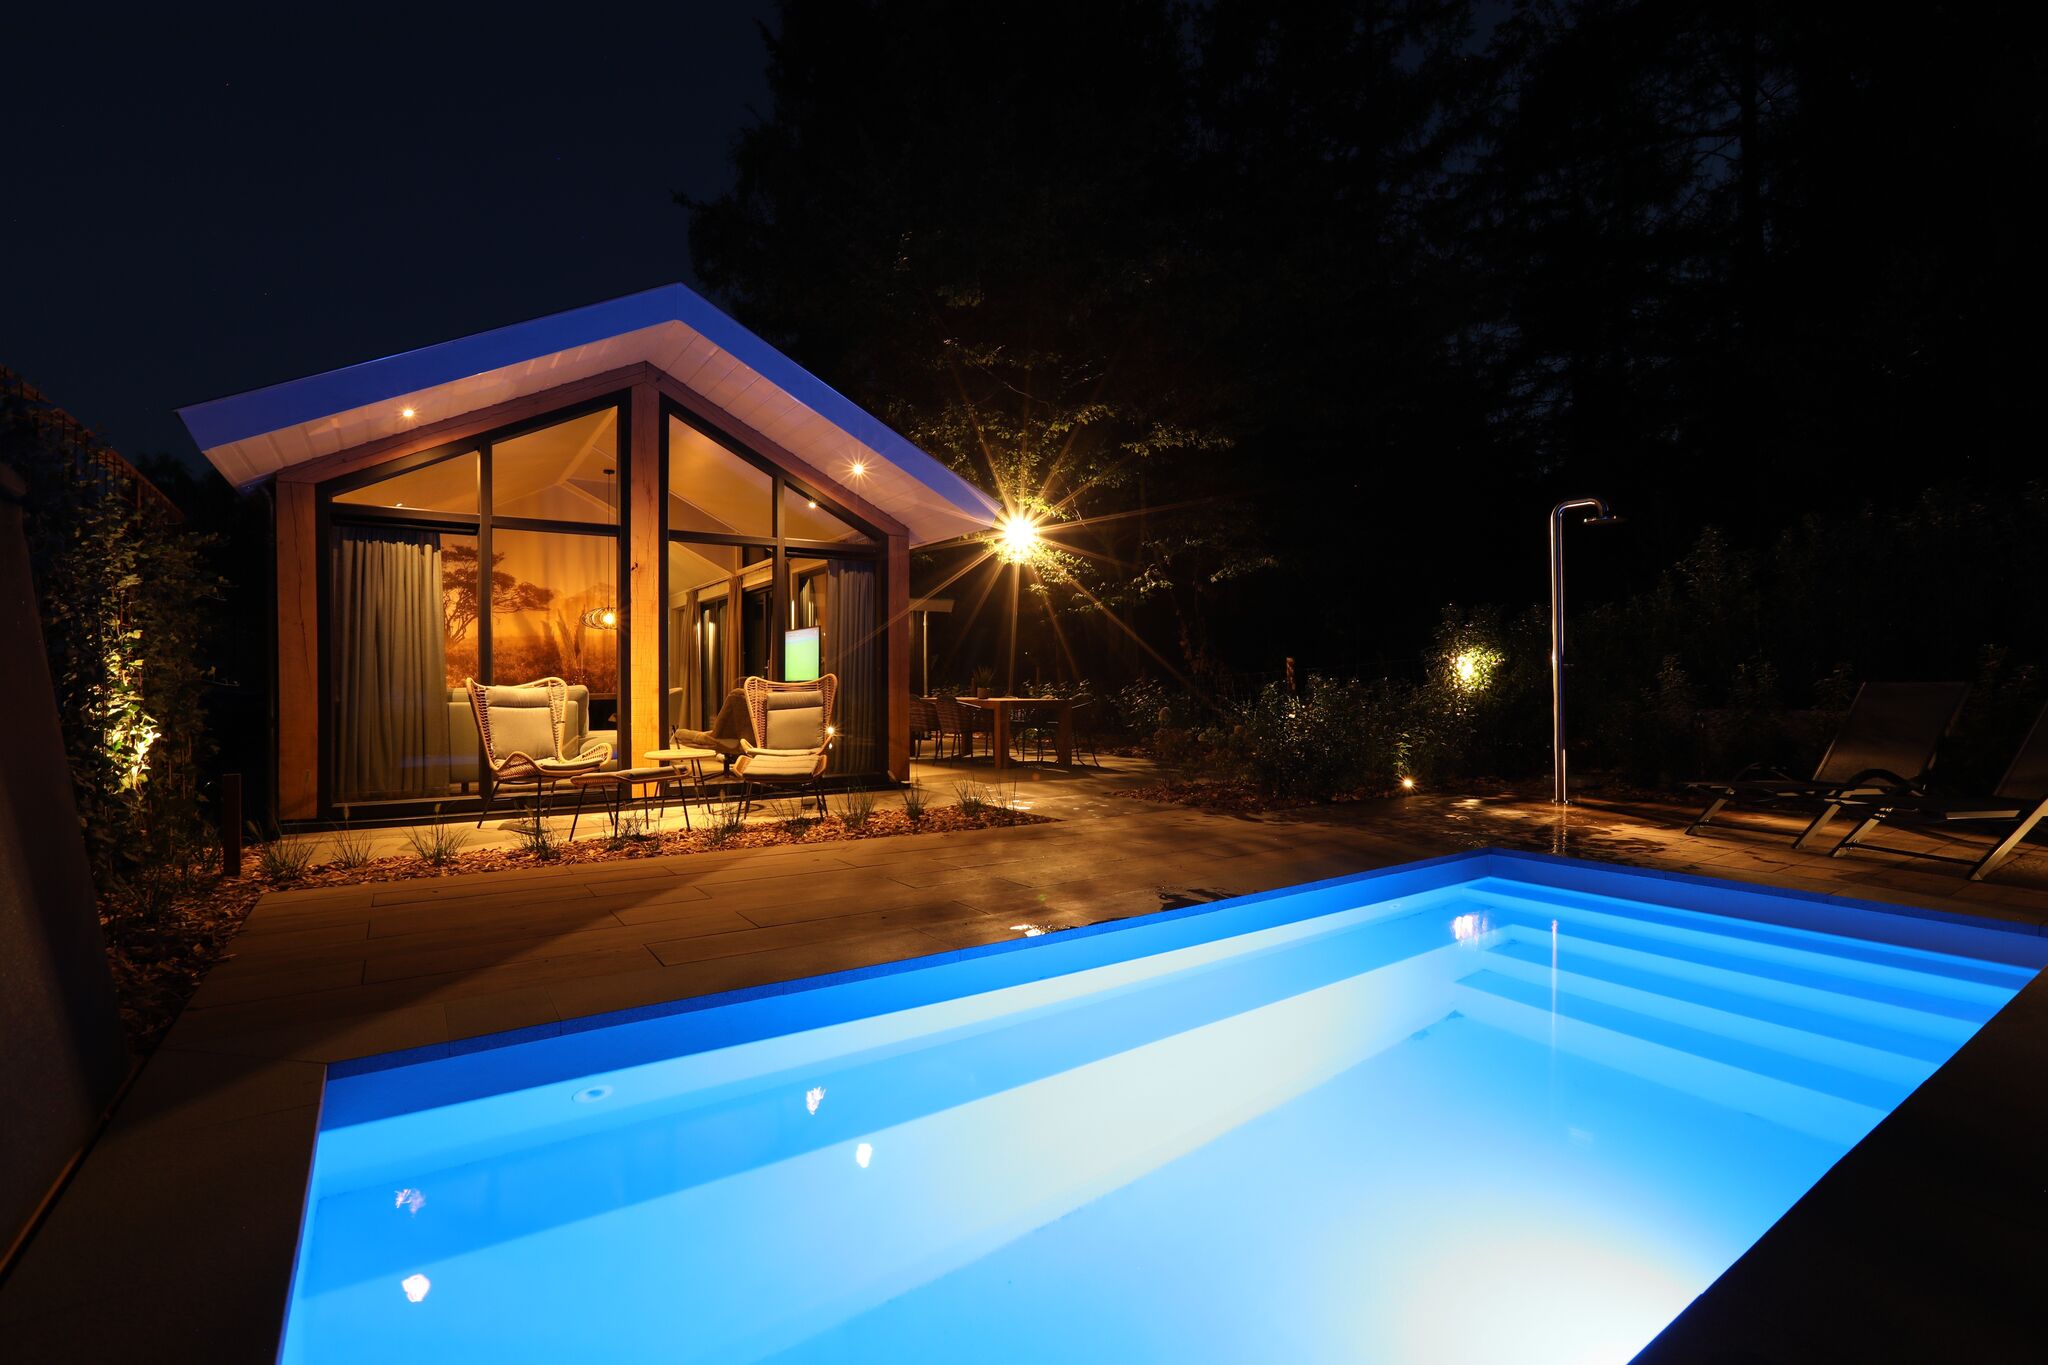 Luxury lodge with private swimming pool